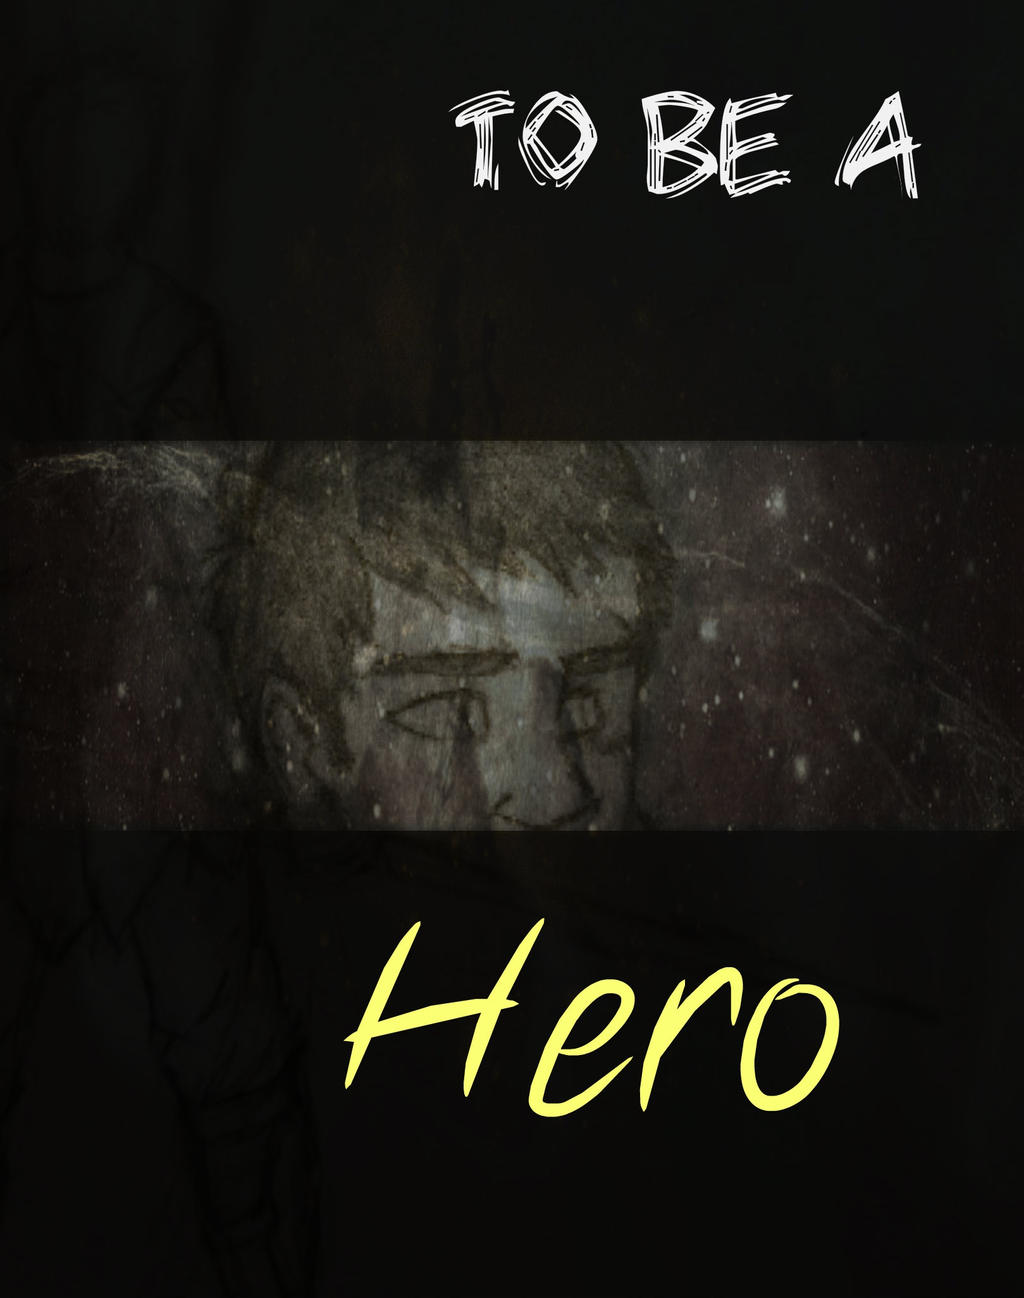 To be a hero cover